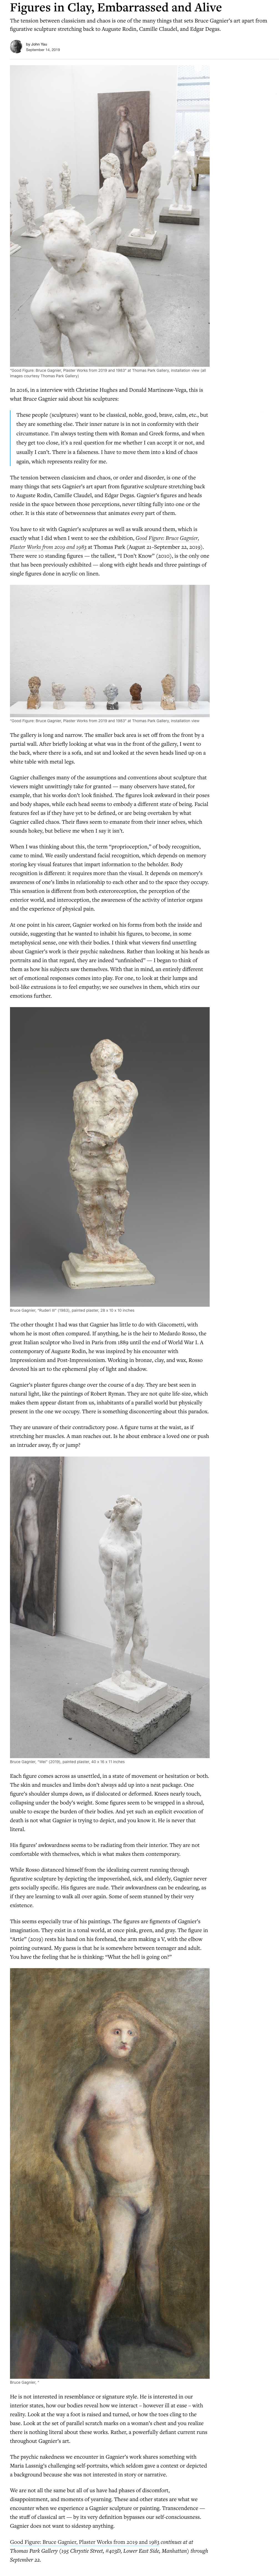 screencapture-hyperallergic-517308-figures-in-clay-embarrassed-and-alive-2022-01-12-18_48_24